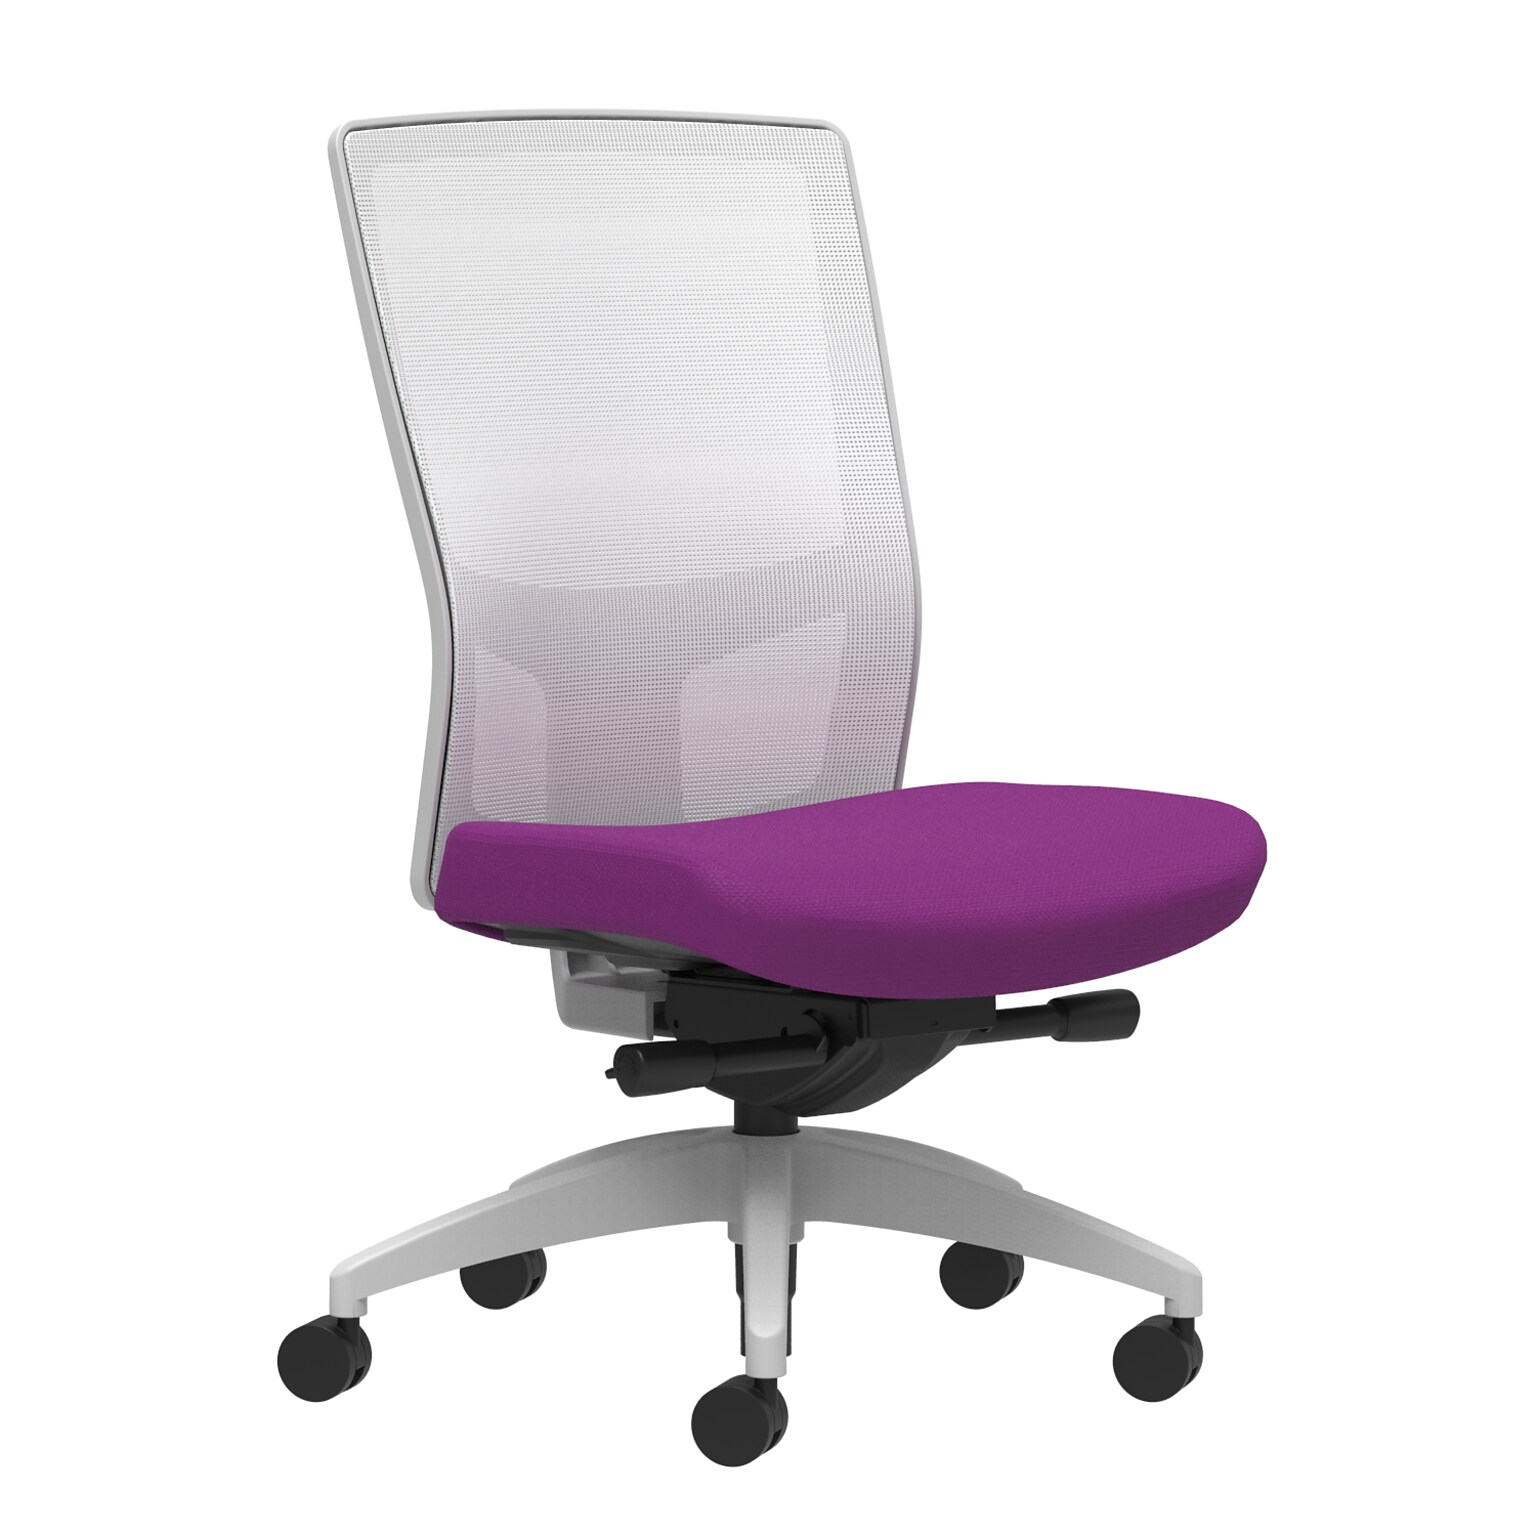 Union & Scale Workplace2.0™ Fabric Task Chair, Amethyst, Integrated Lumbar, Armless, Advanced Synchro-Tilt Seat Control (53556)